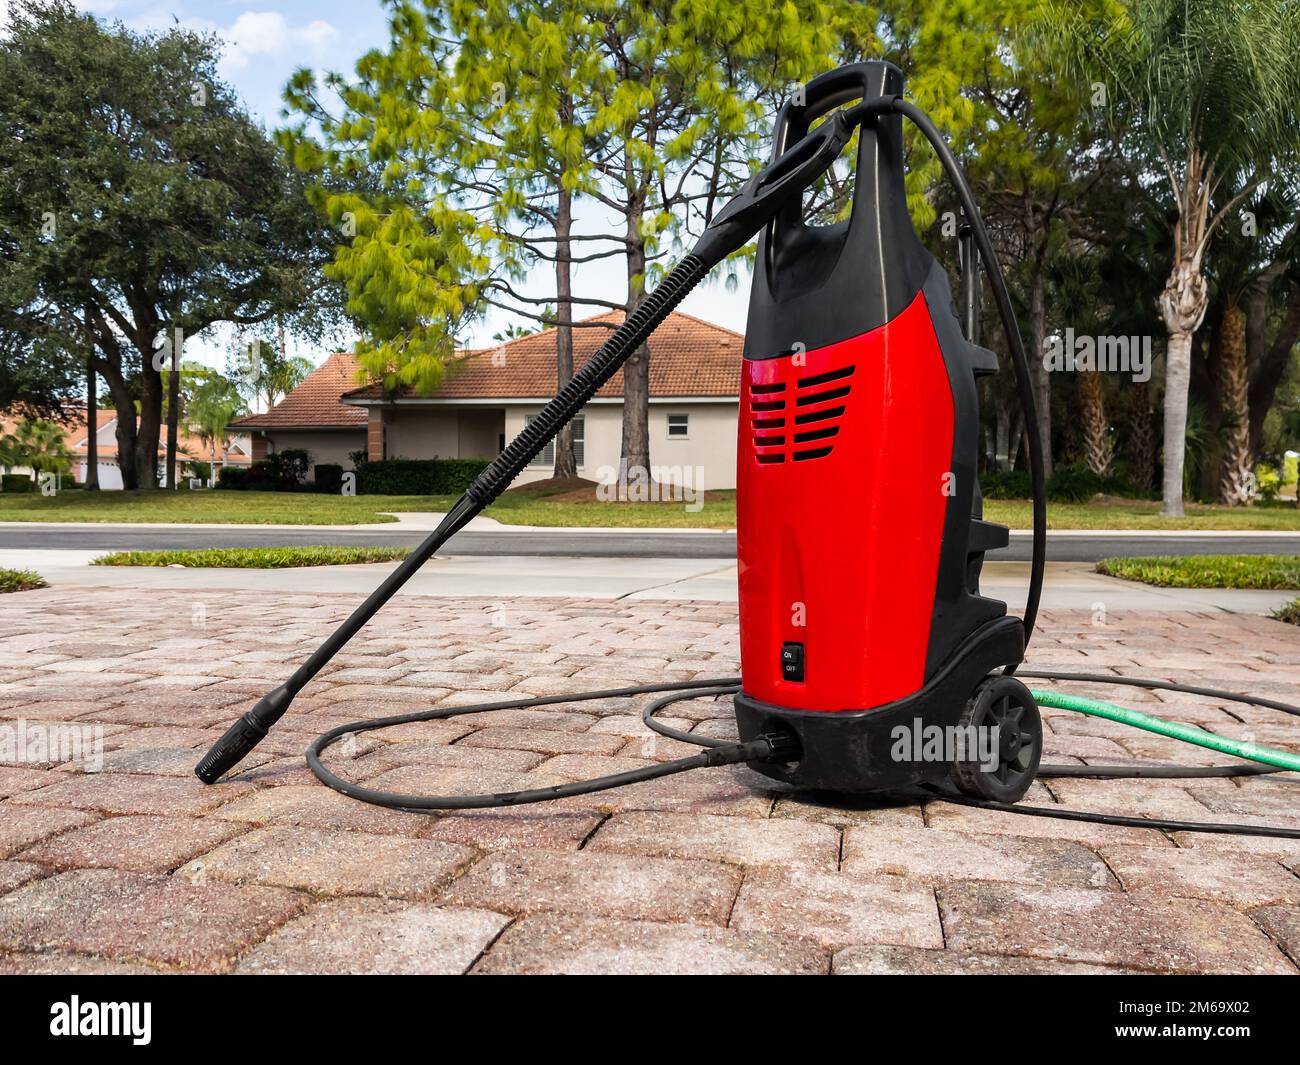 Electric powered pressure washer. Power wash cleaning service equipment. Stock Photo